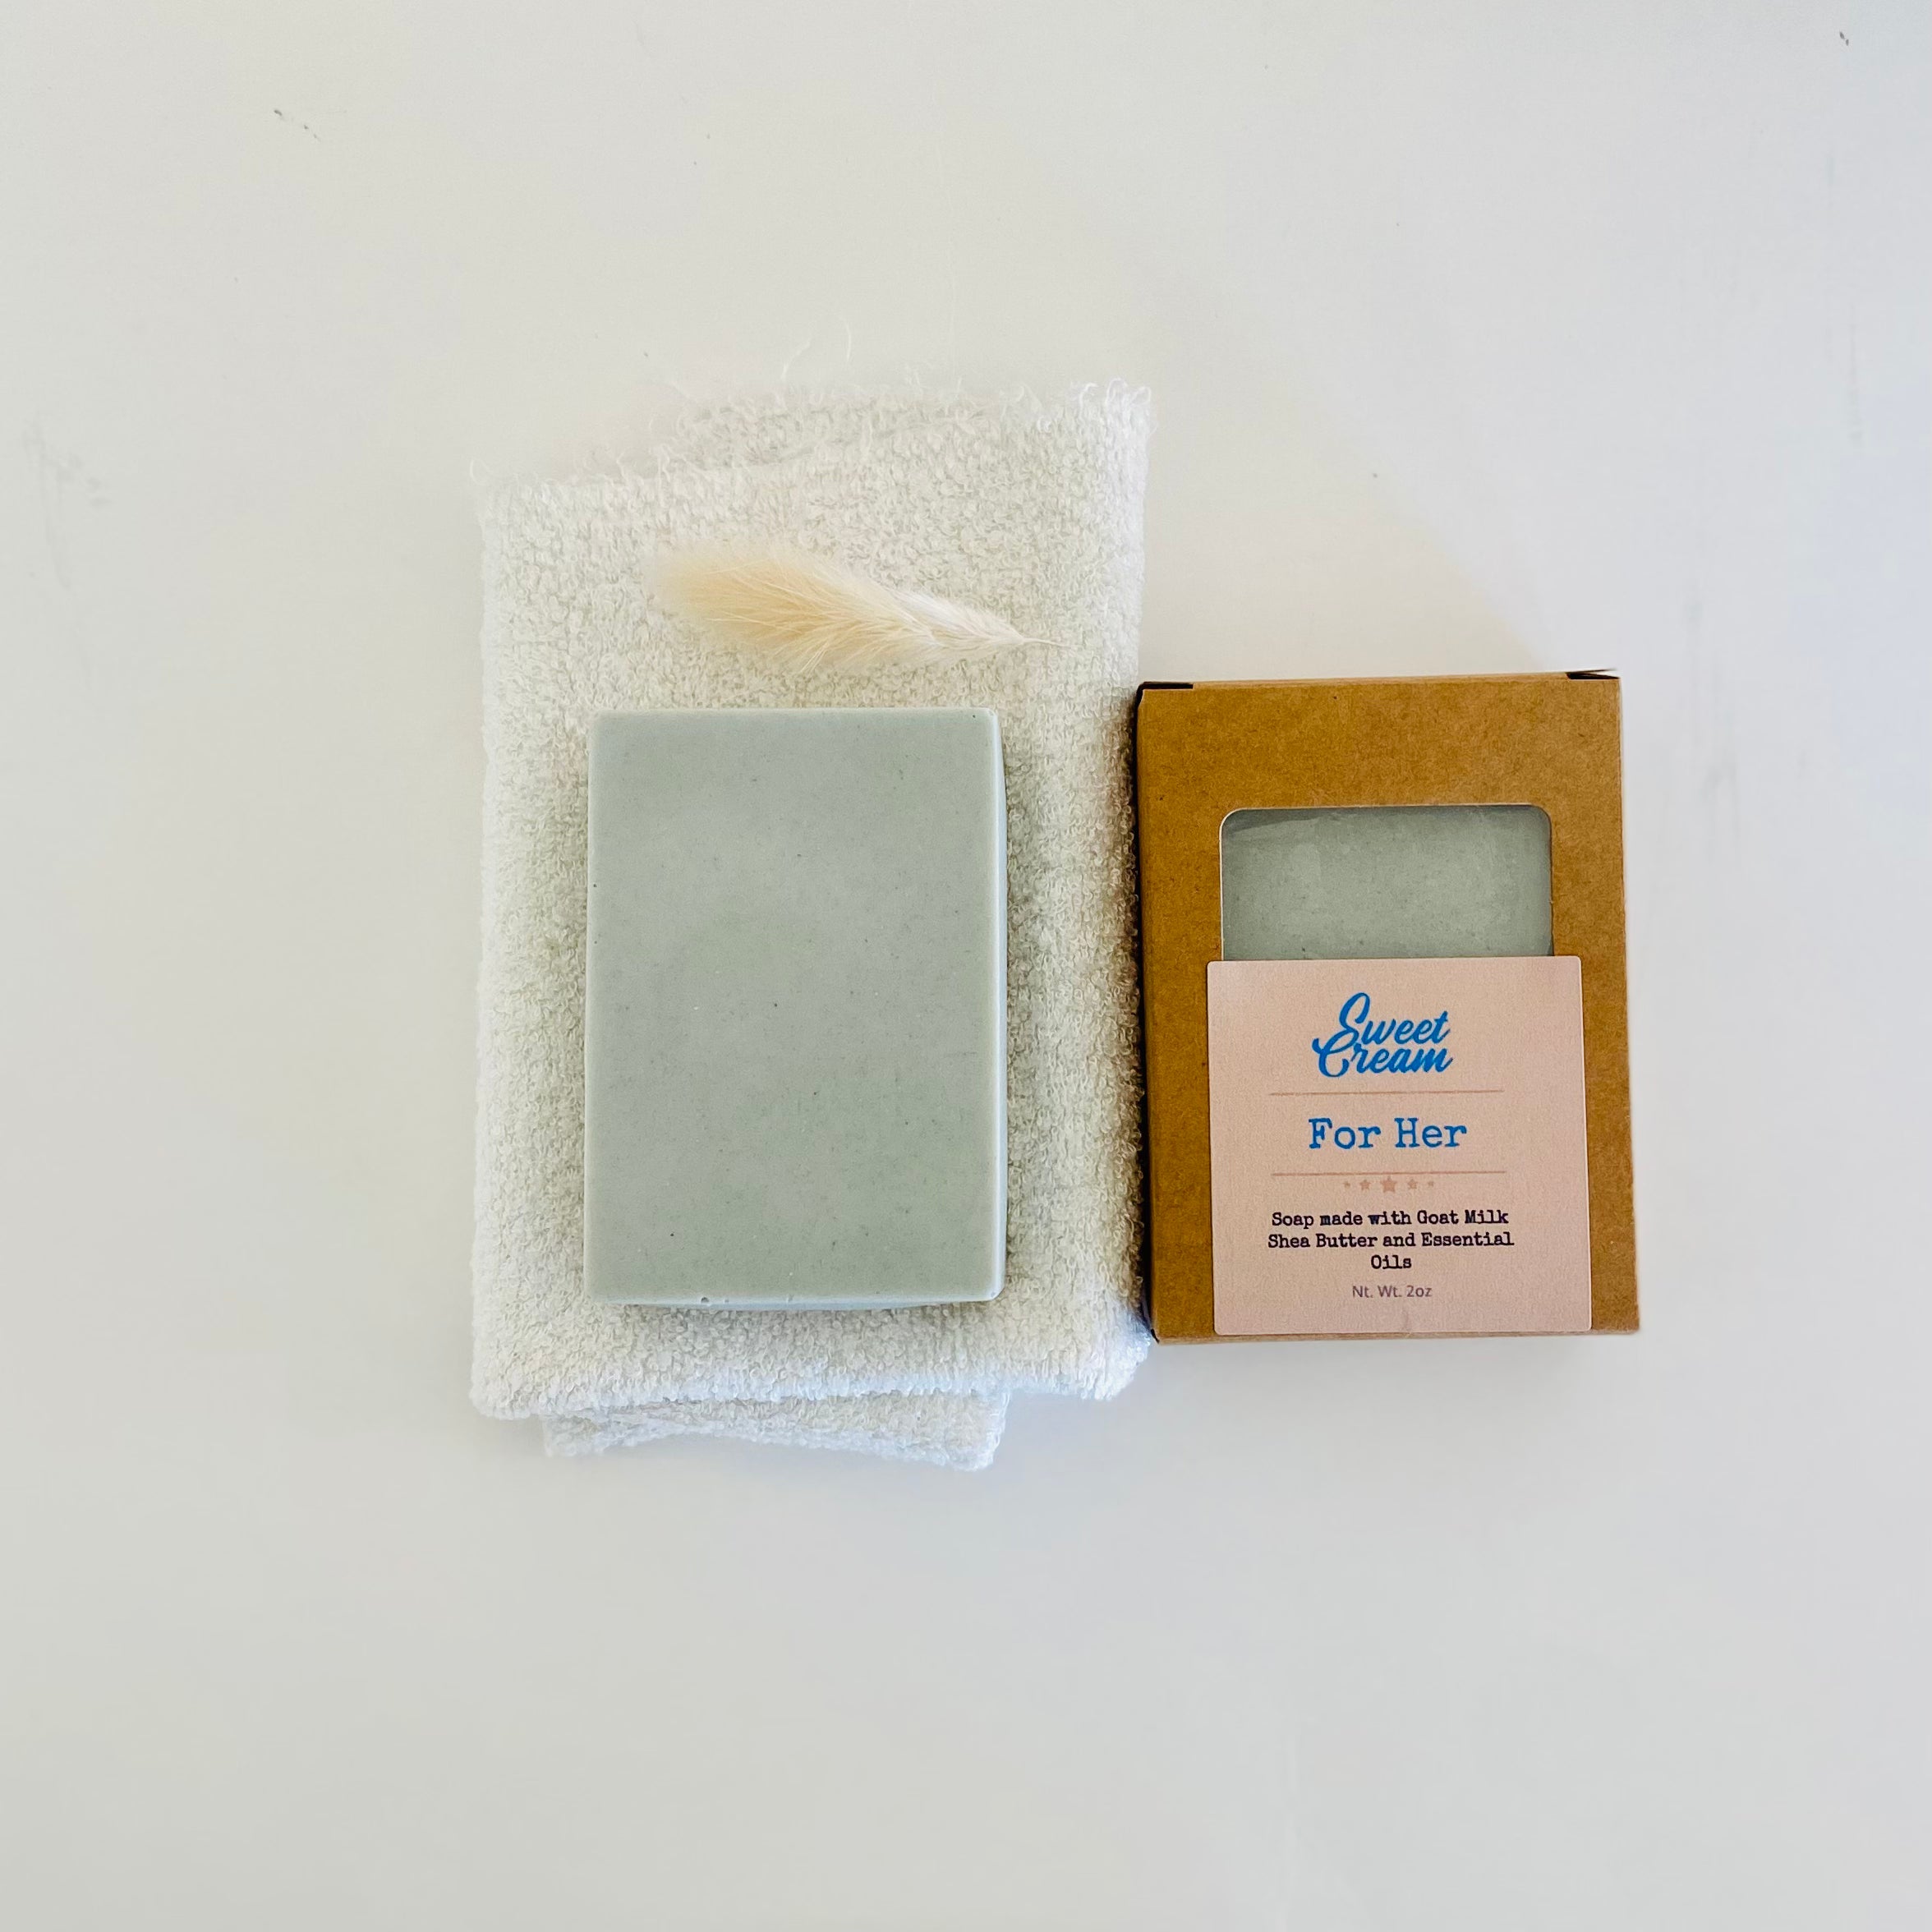 For Her, soap is packed with natural ingredients to cleanse your skin without stripping away your body's natural essence. Made with Abercrombie and Fitch elegant organic fragrance oil and a hint of peach notes. 